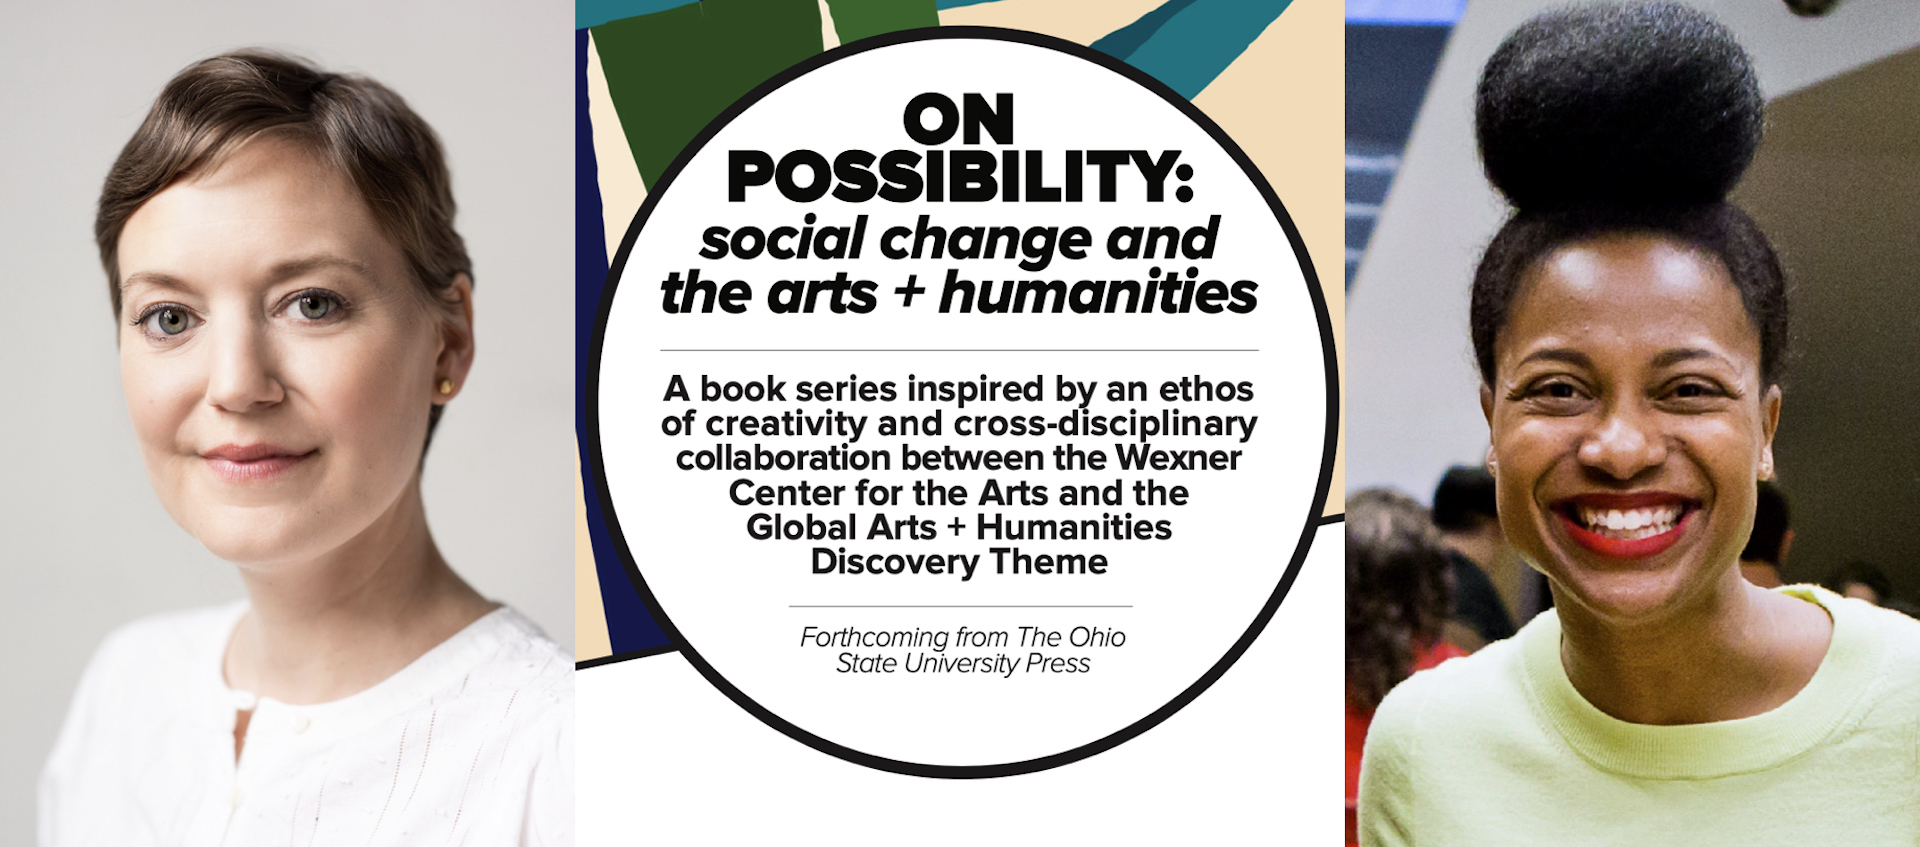 Wex curators Kelly Kivland and Dionne Custer Edwards flank a logo for the book series On Possibility